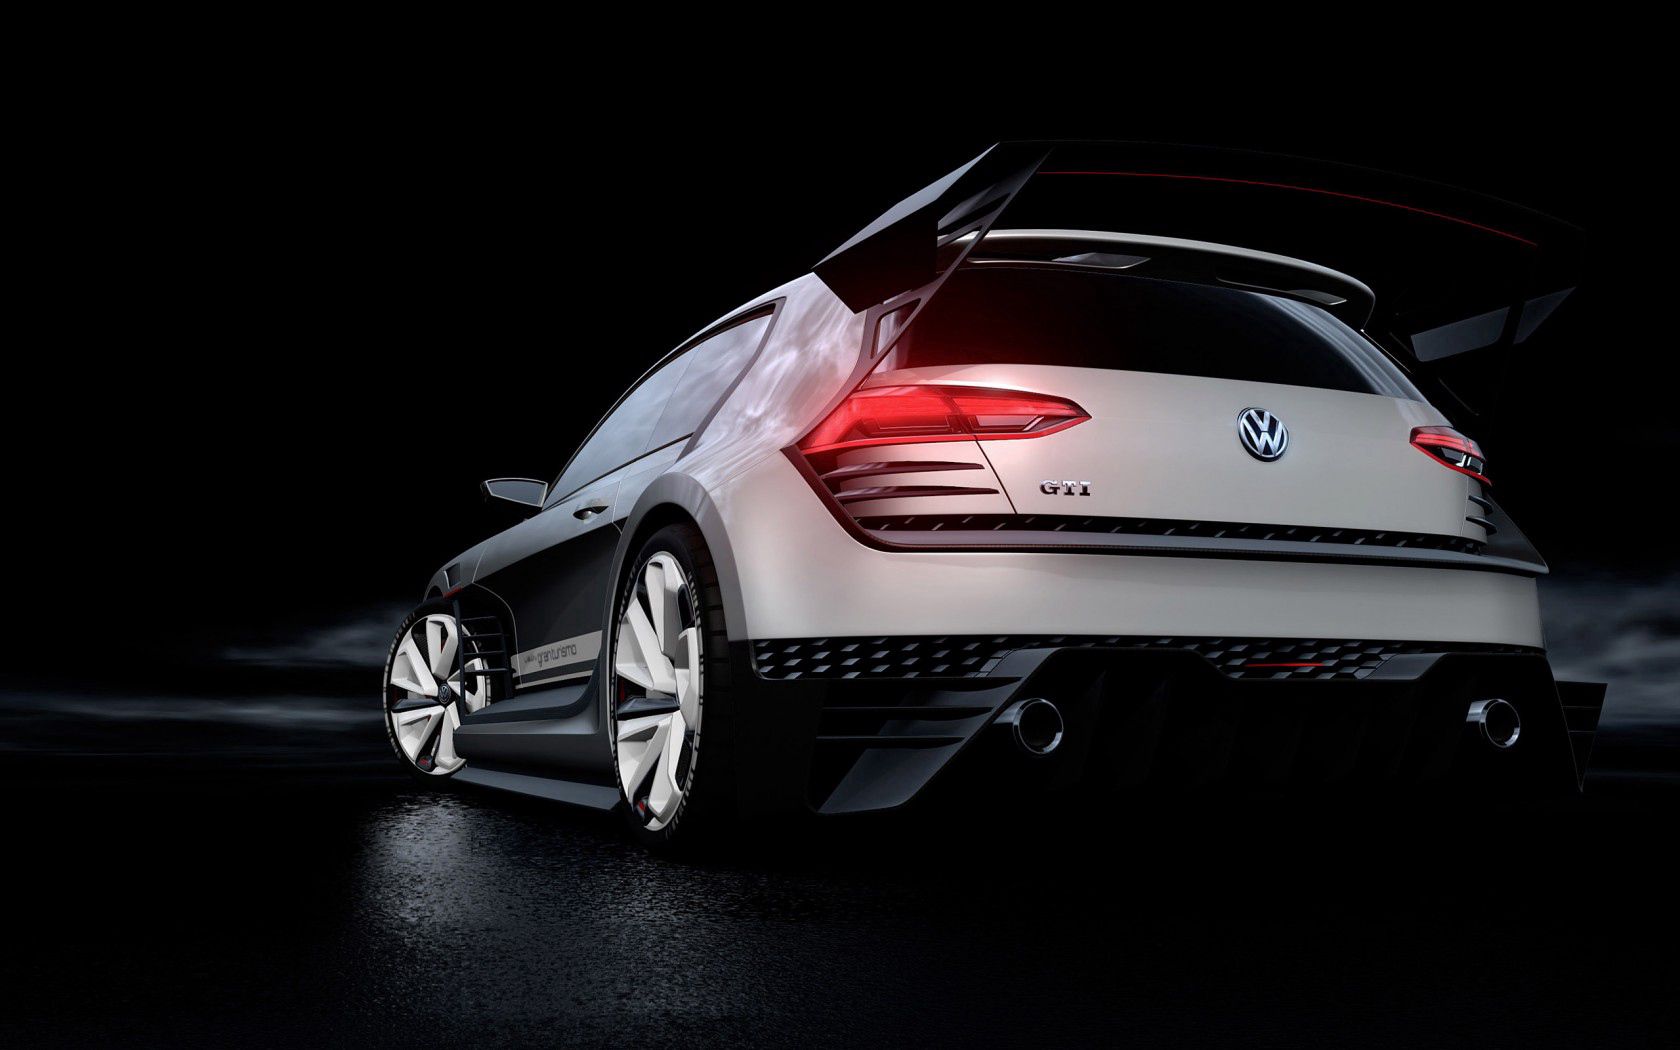 gti, back view, volkswagen, cars, concept, rear view, style